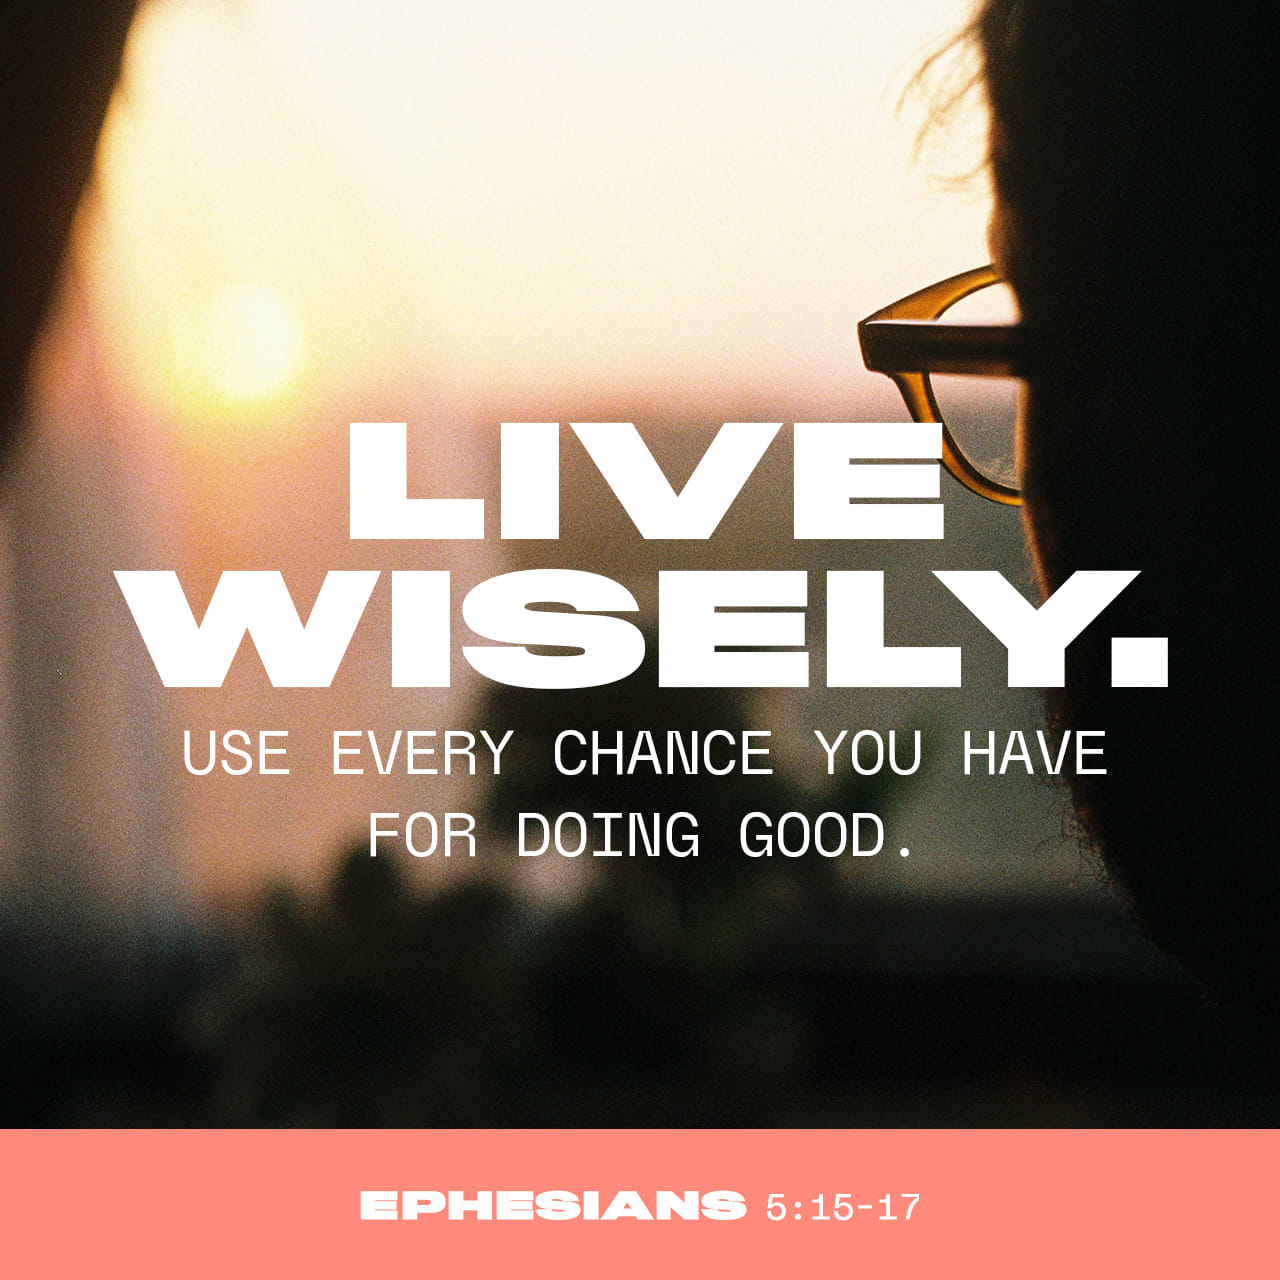 Live Wisely - Ephesians 5:15-17 - Verse Image